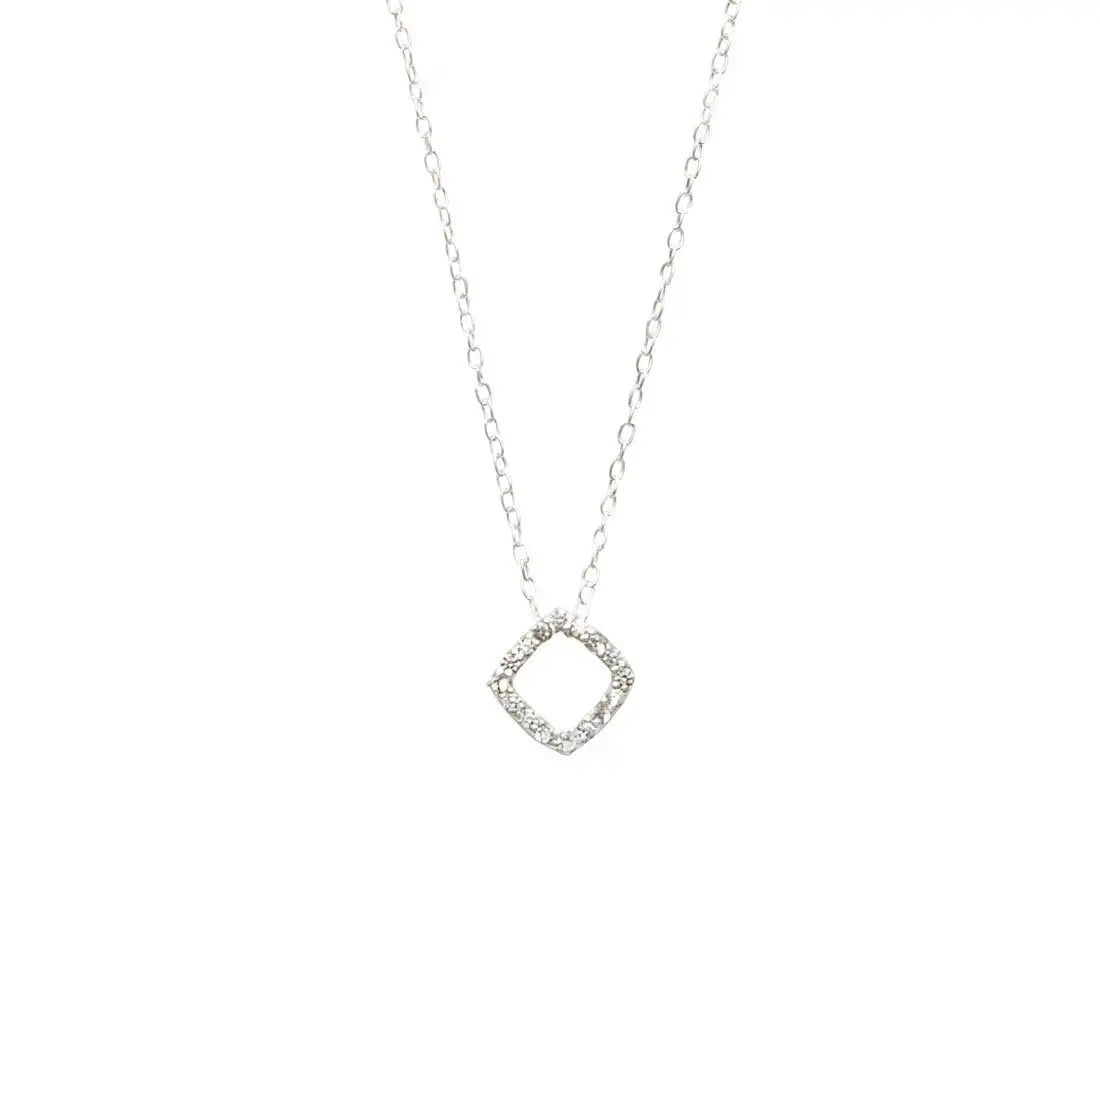 45cm Sterling Silver Cubic Zirconia Open Square Necklace